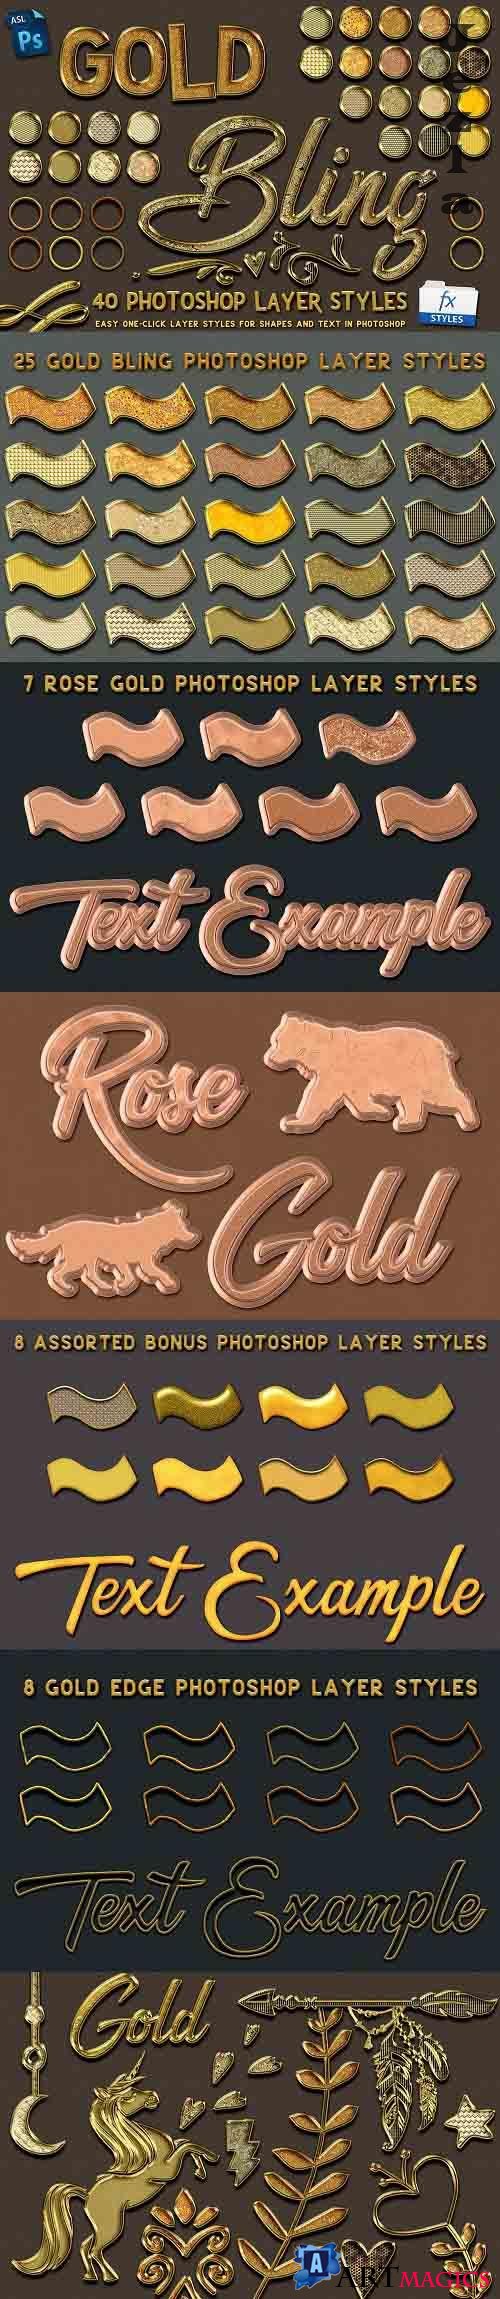 CreativeMarket - Gold Bling Photoshop Layer Styles 5115006